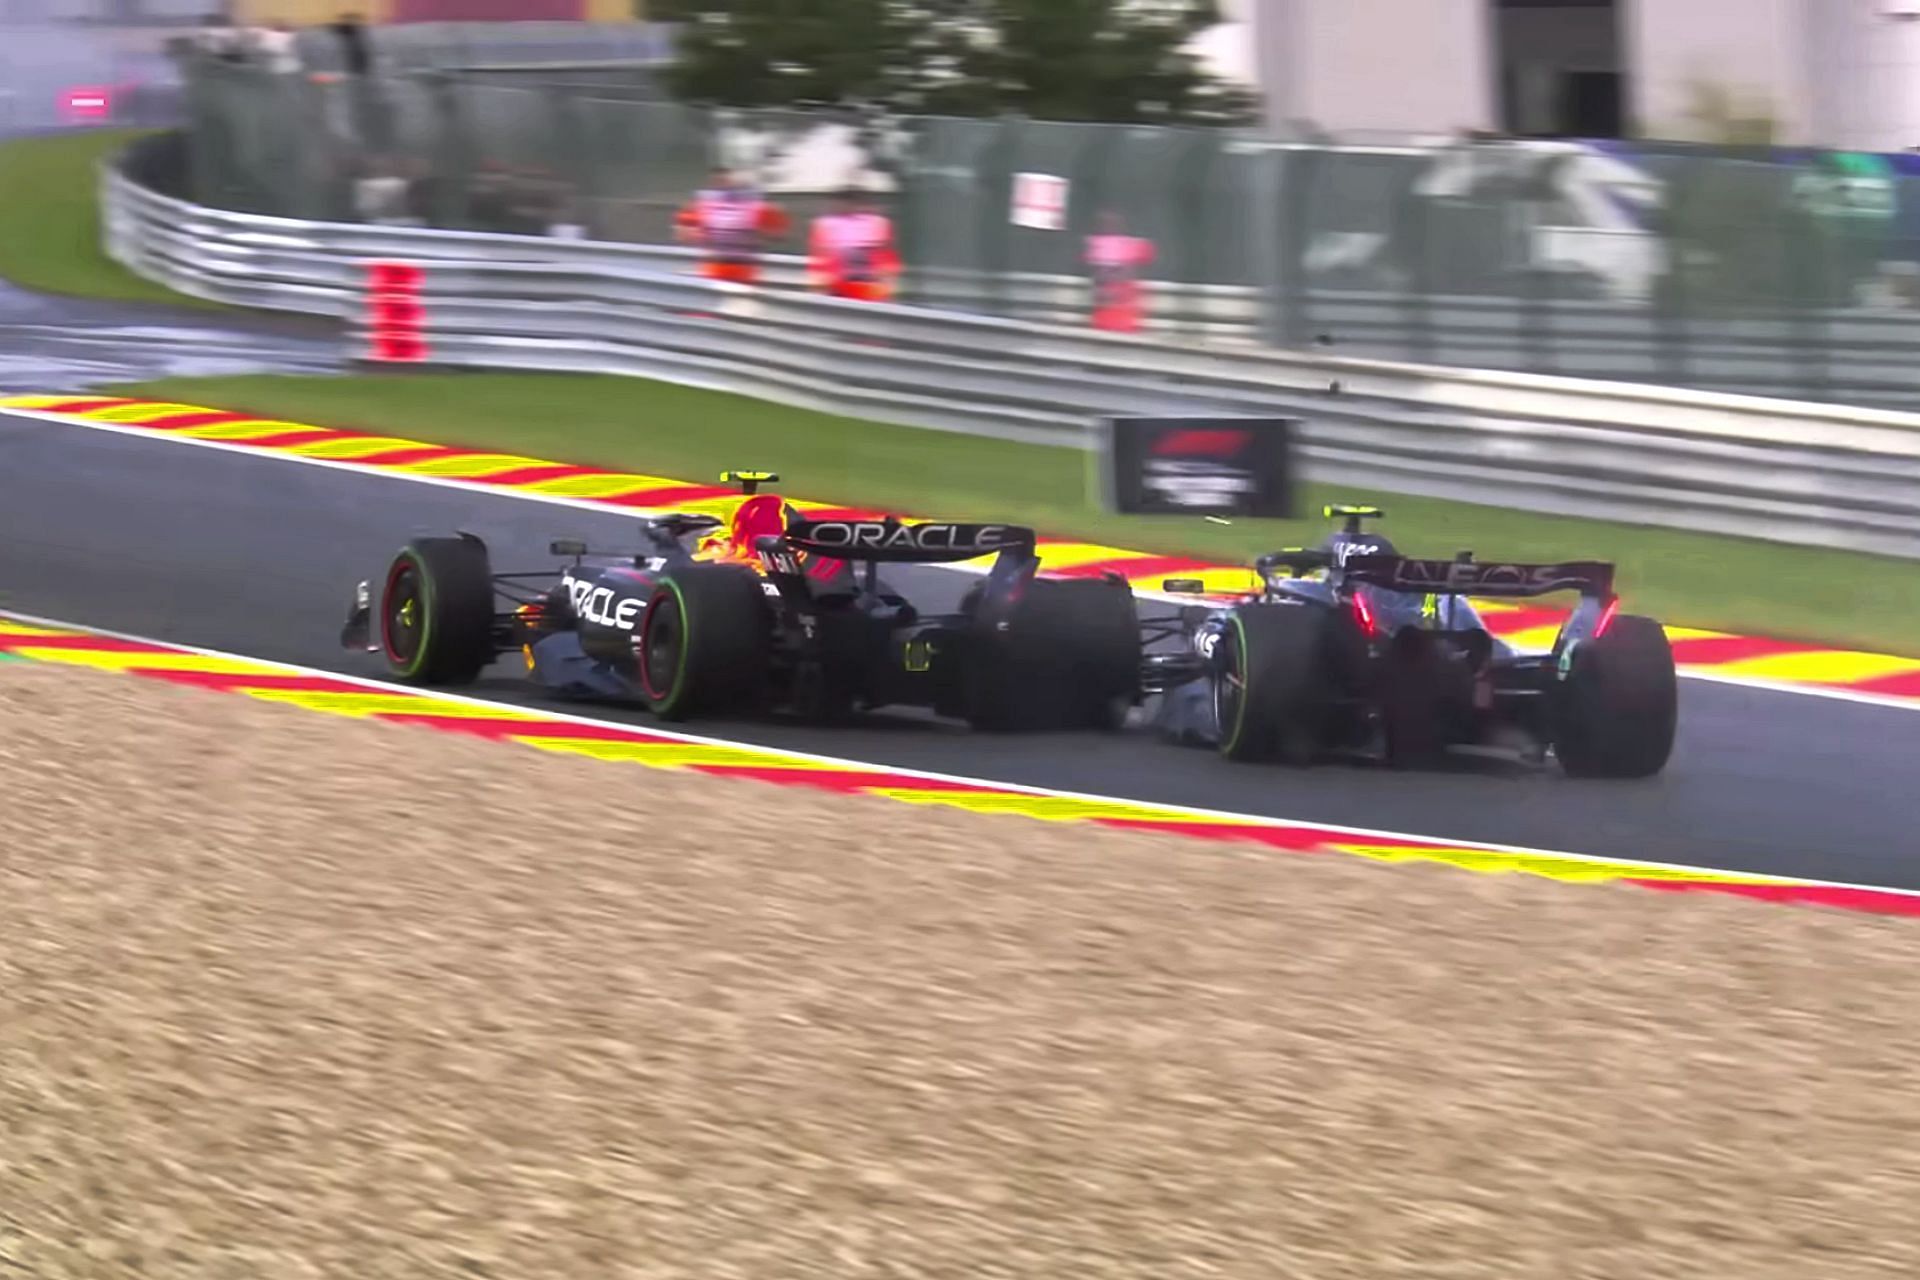 Sergio Perez (11) and Lewis Hamilton (44) collide with each other during Sprint race prior to the 2023 F1 Belgian Grand Prix (Image via Sportskeeda)